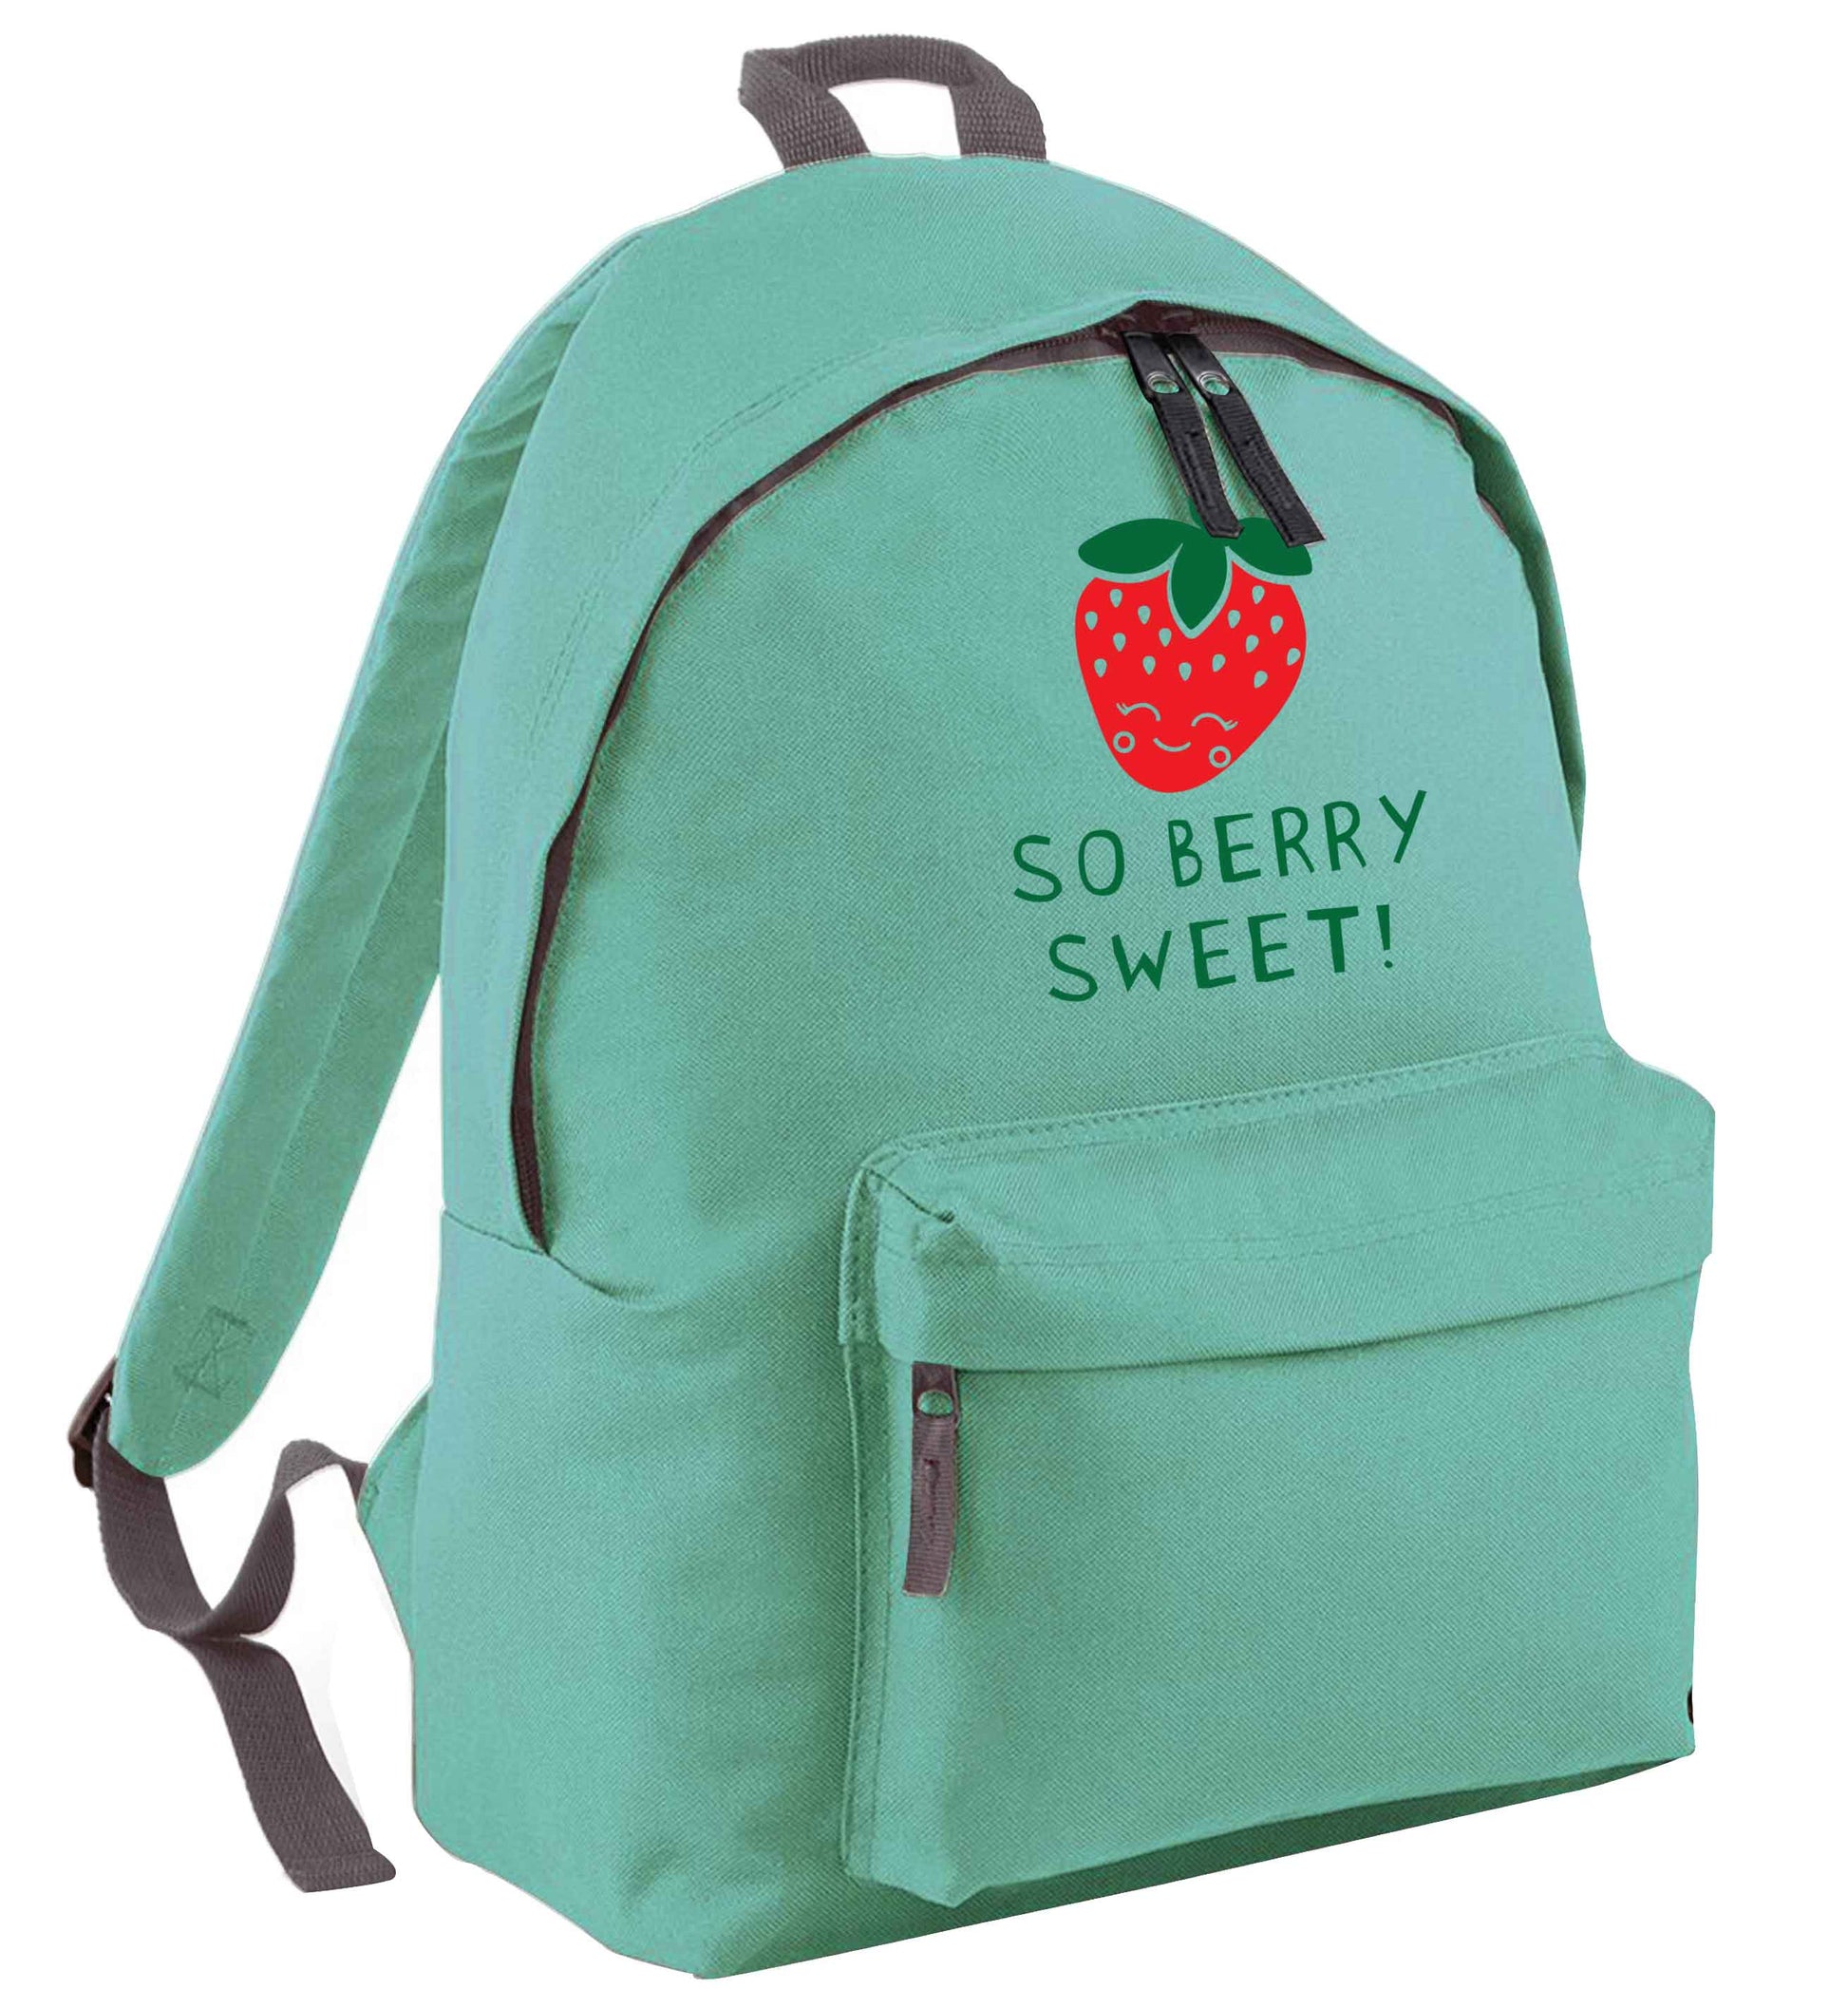 So berry sweet mint adults backpack